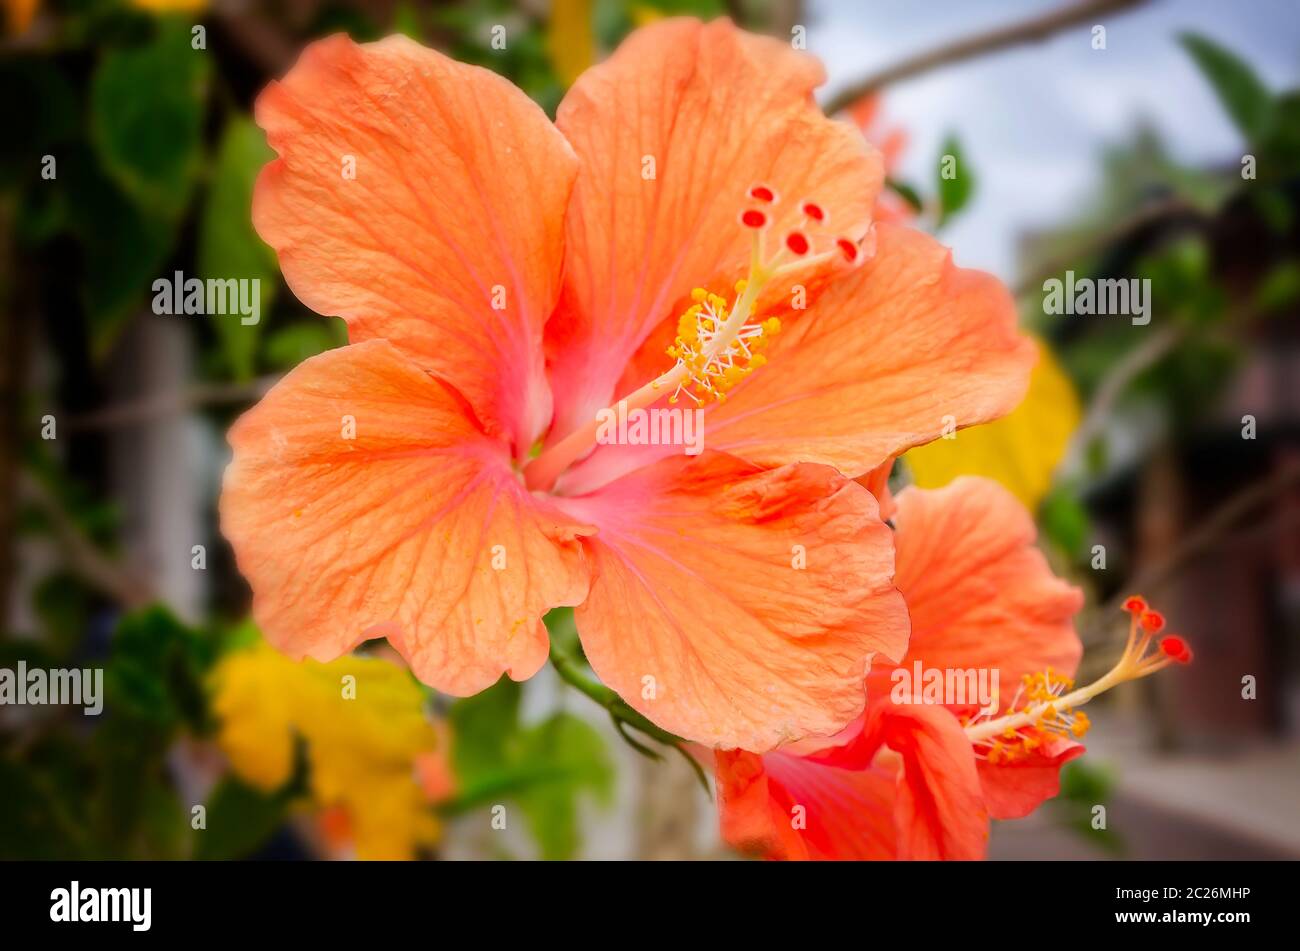 An orange hibiscus flower blooms, April 11, 2015, in St. Augustine, Florida. The hibiscus is native to warm subtropical and tropical regions. Stock Photo